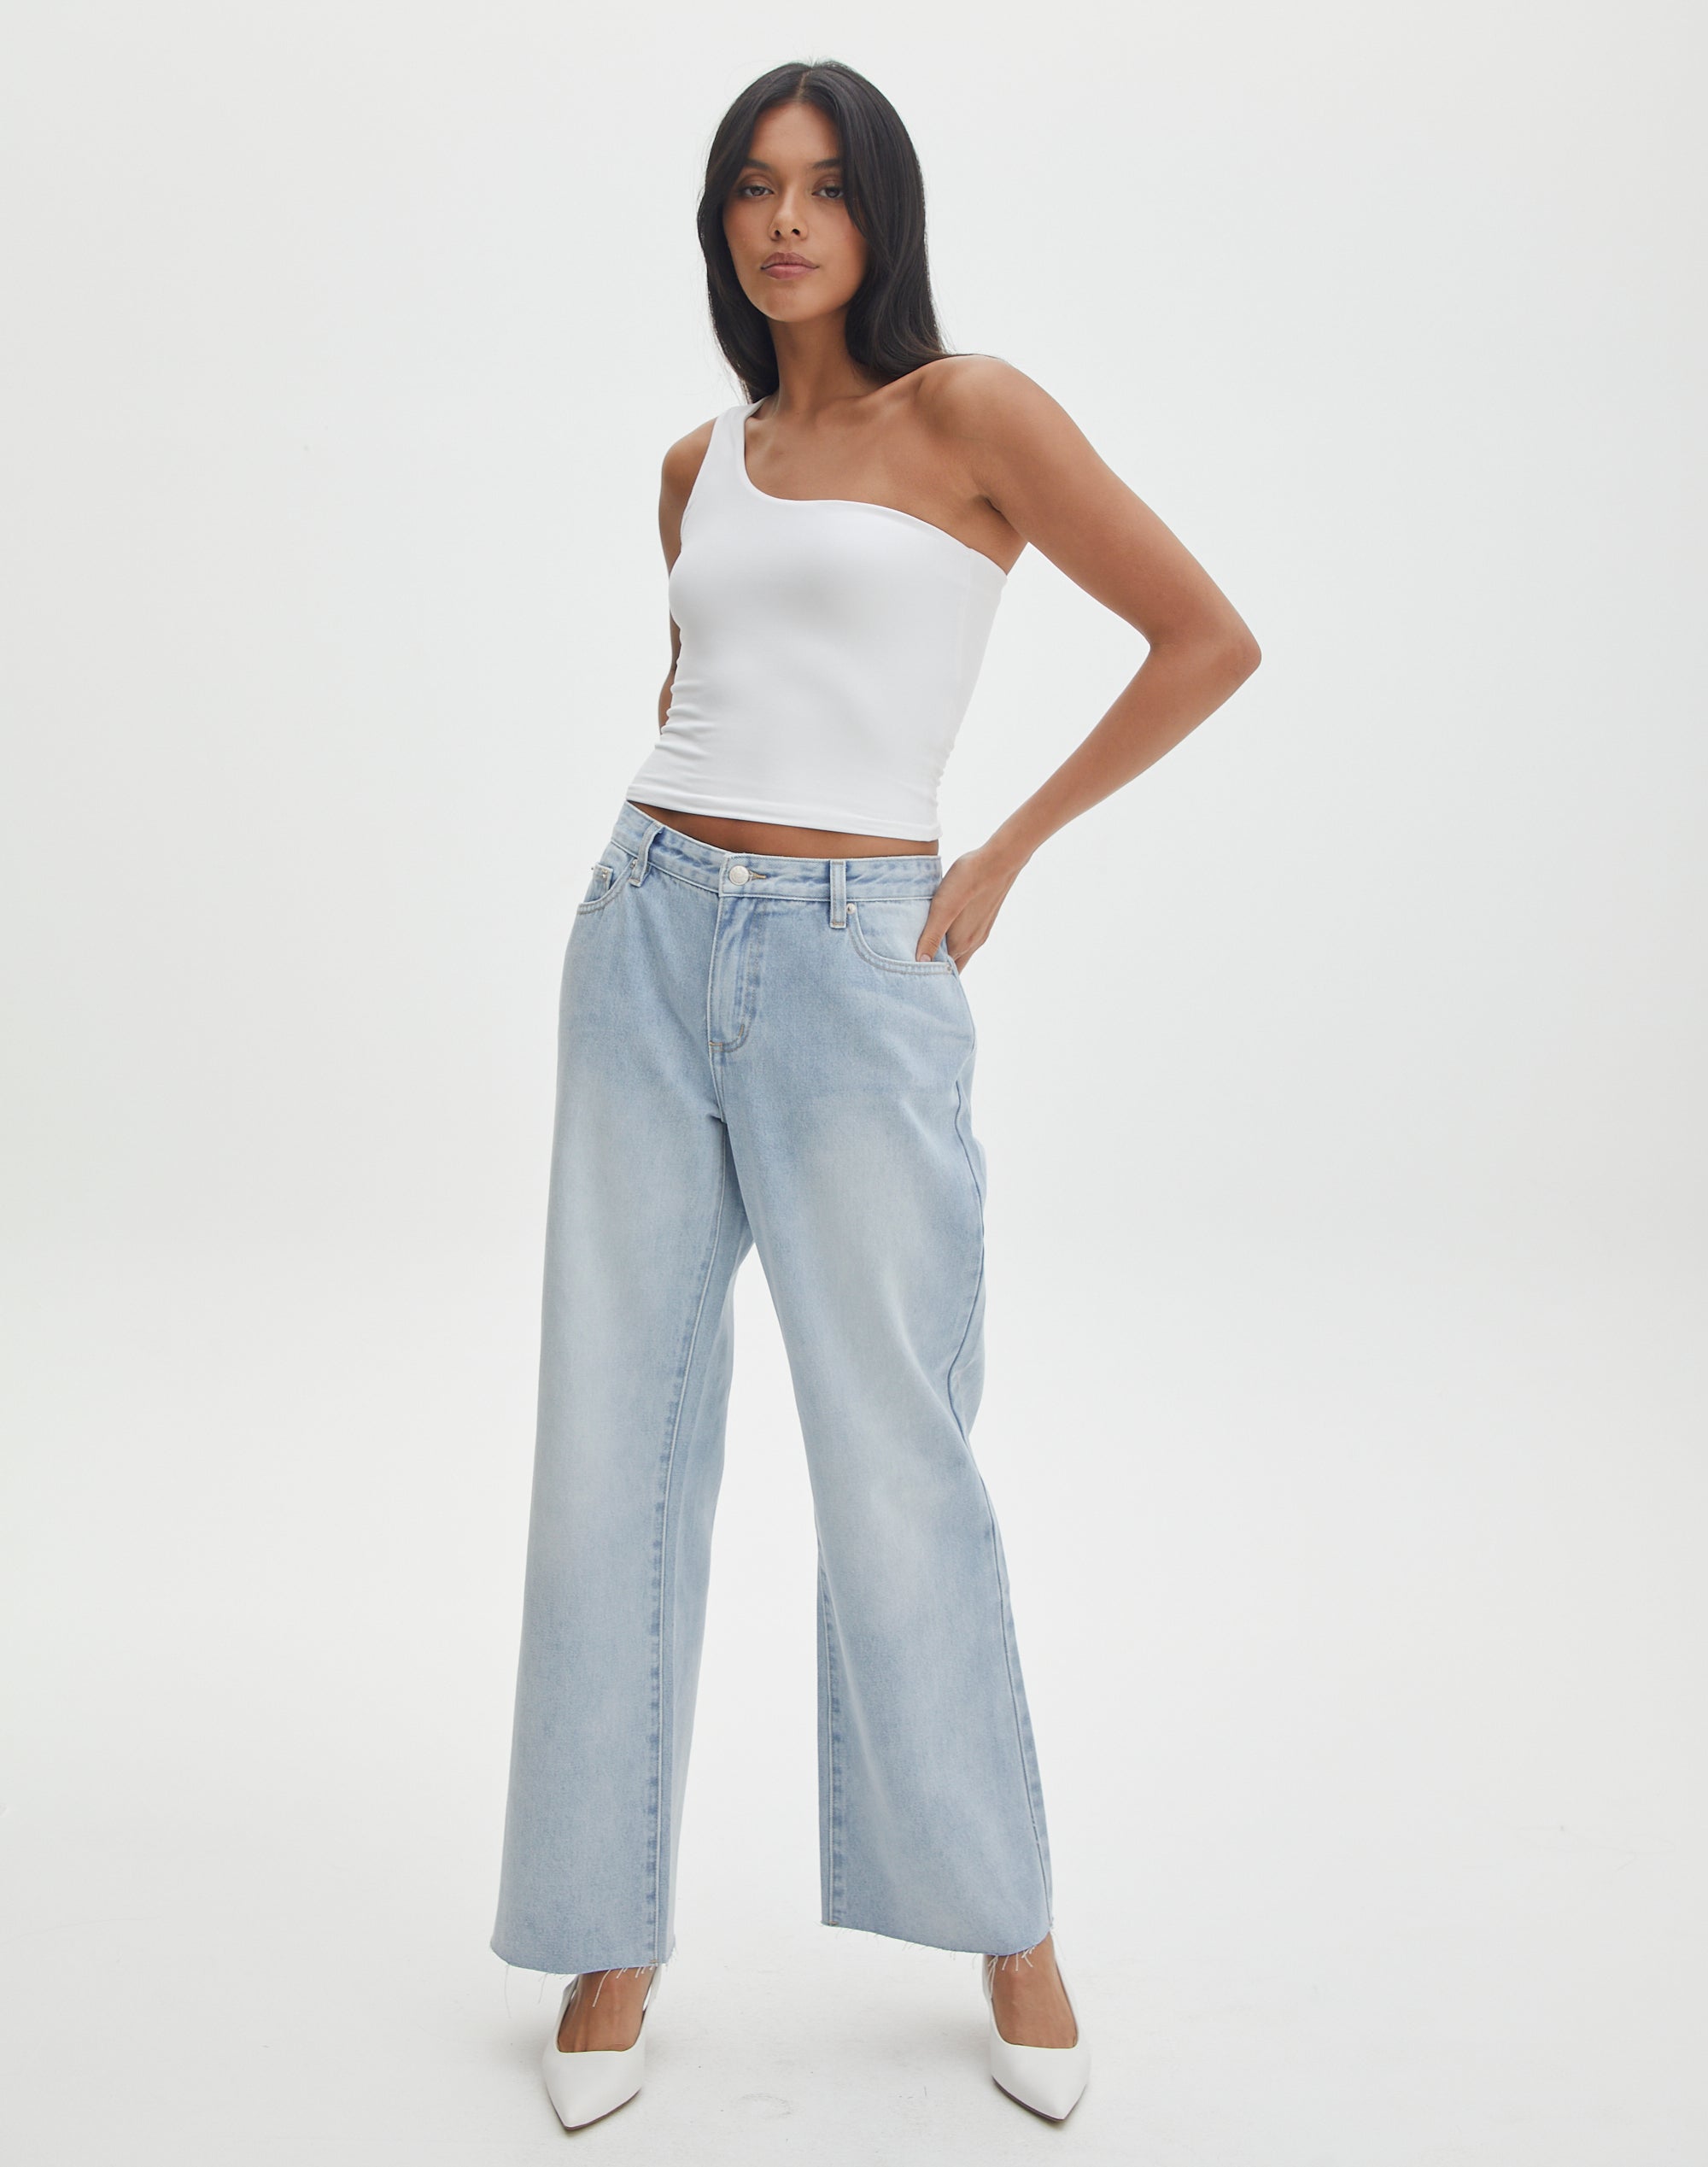 https://www.glassons.com/content/products/aimee-low-rise-straight-jean-elsa-wash-front-jd54235pdnm.jpg